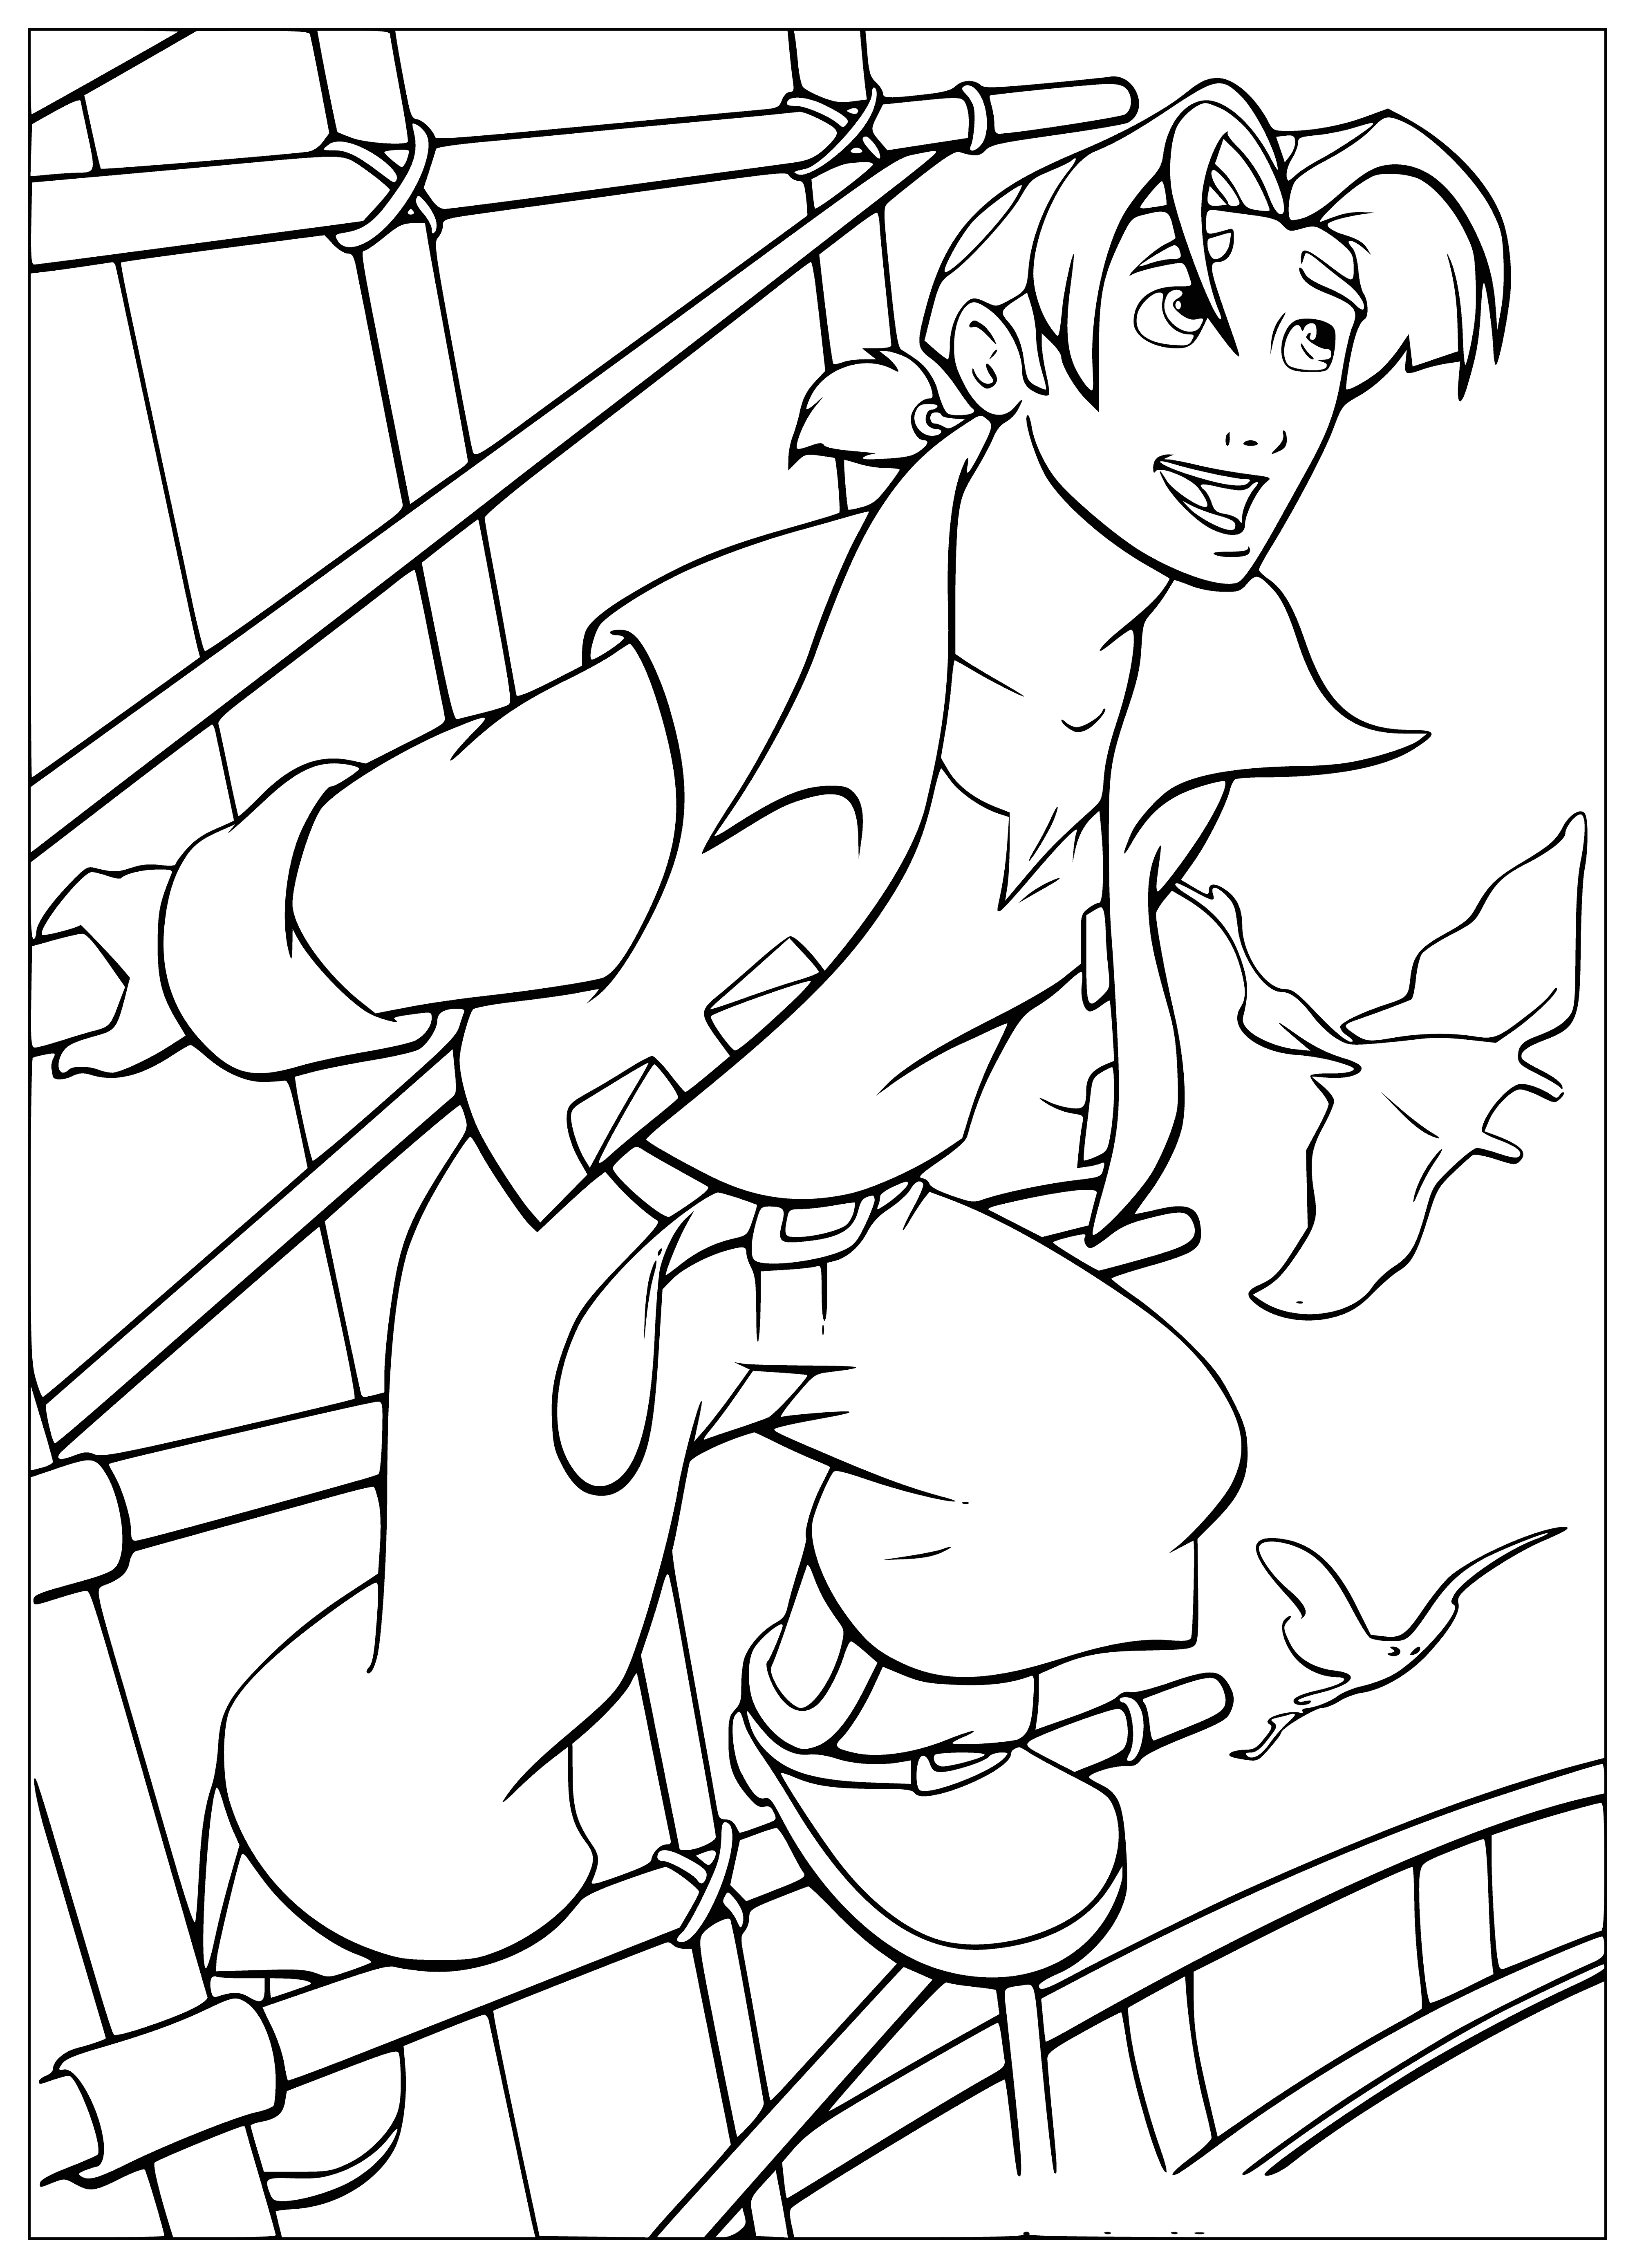 coloring page: Boy in "J" shirt explores planet, gazing into the distance with telescope in one hand, pointing with the other.